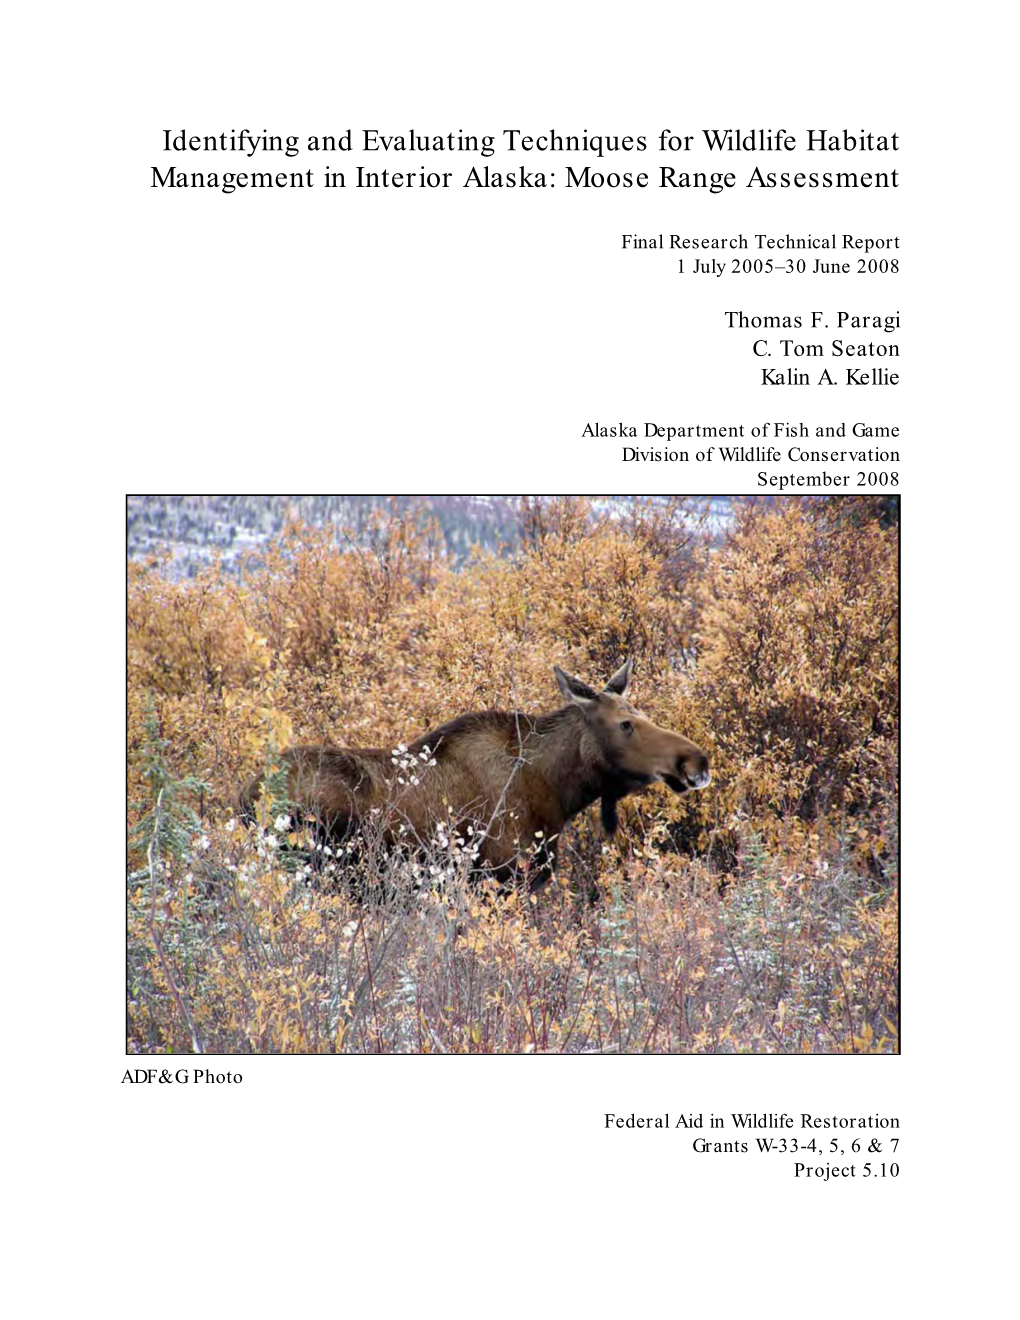 Identifying and Evaluating Techniques for Wildlife Habitat Management in Interior Alaska:Moose Range Assessment, Final Research